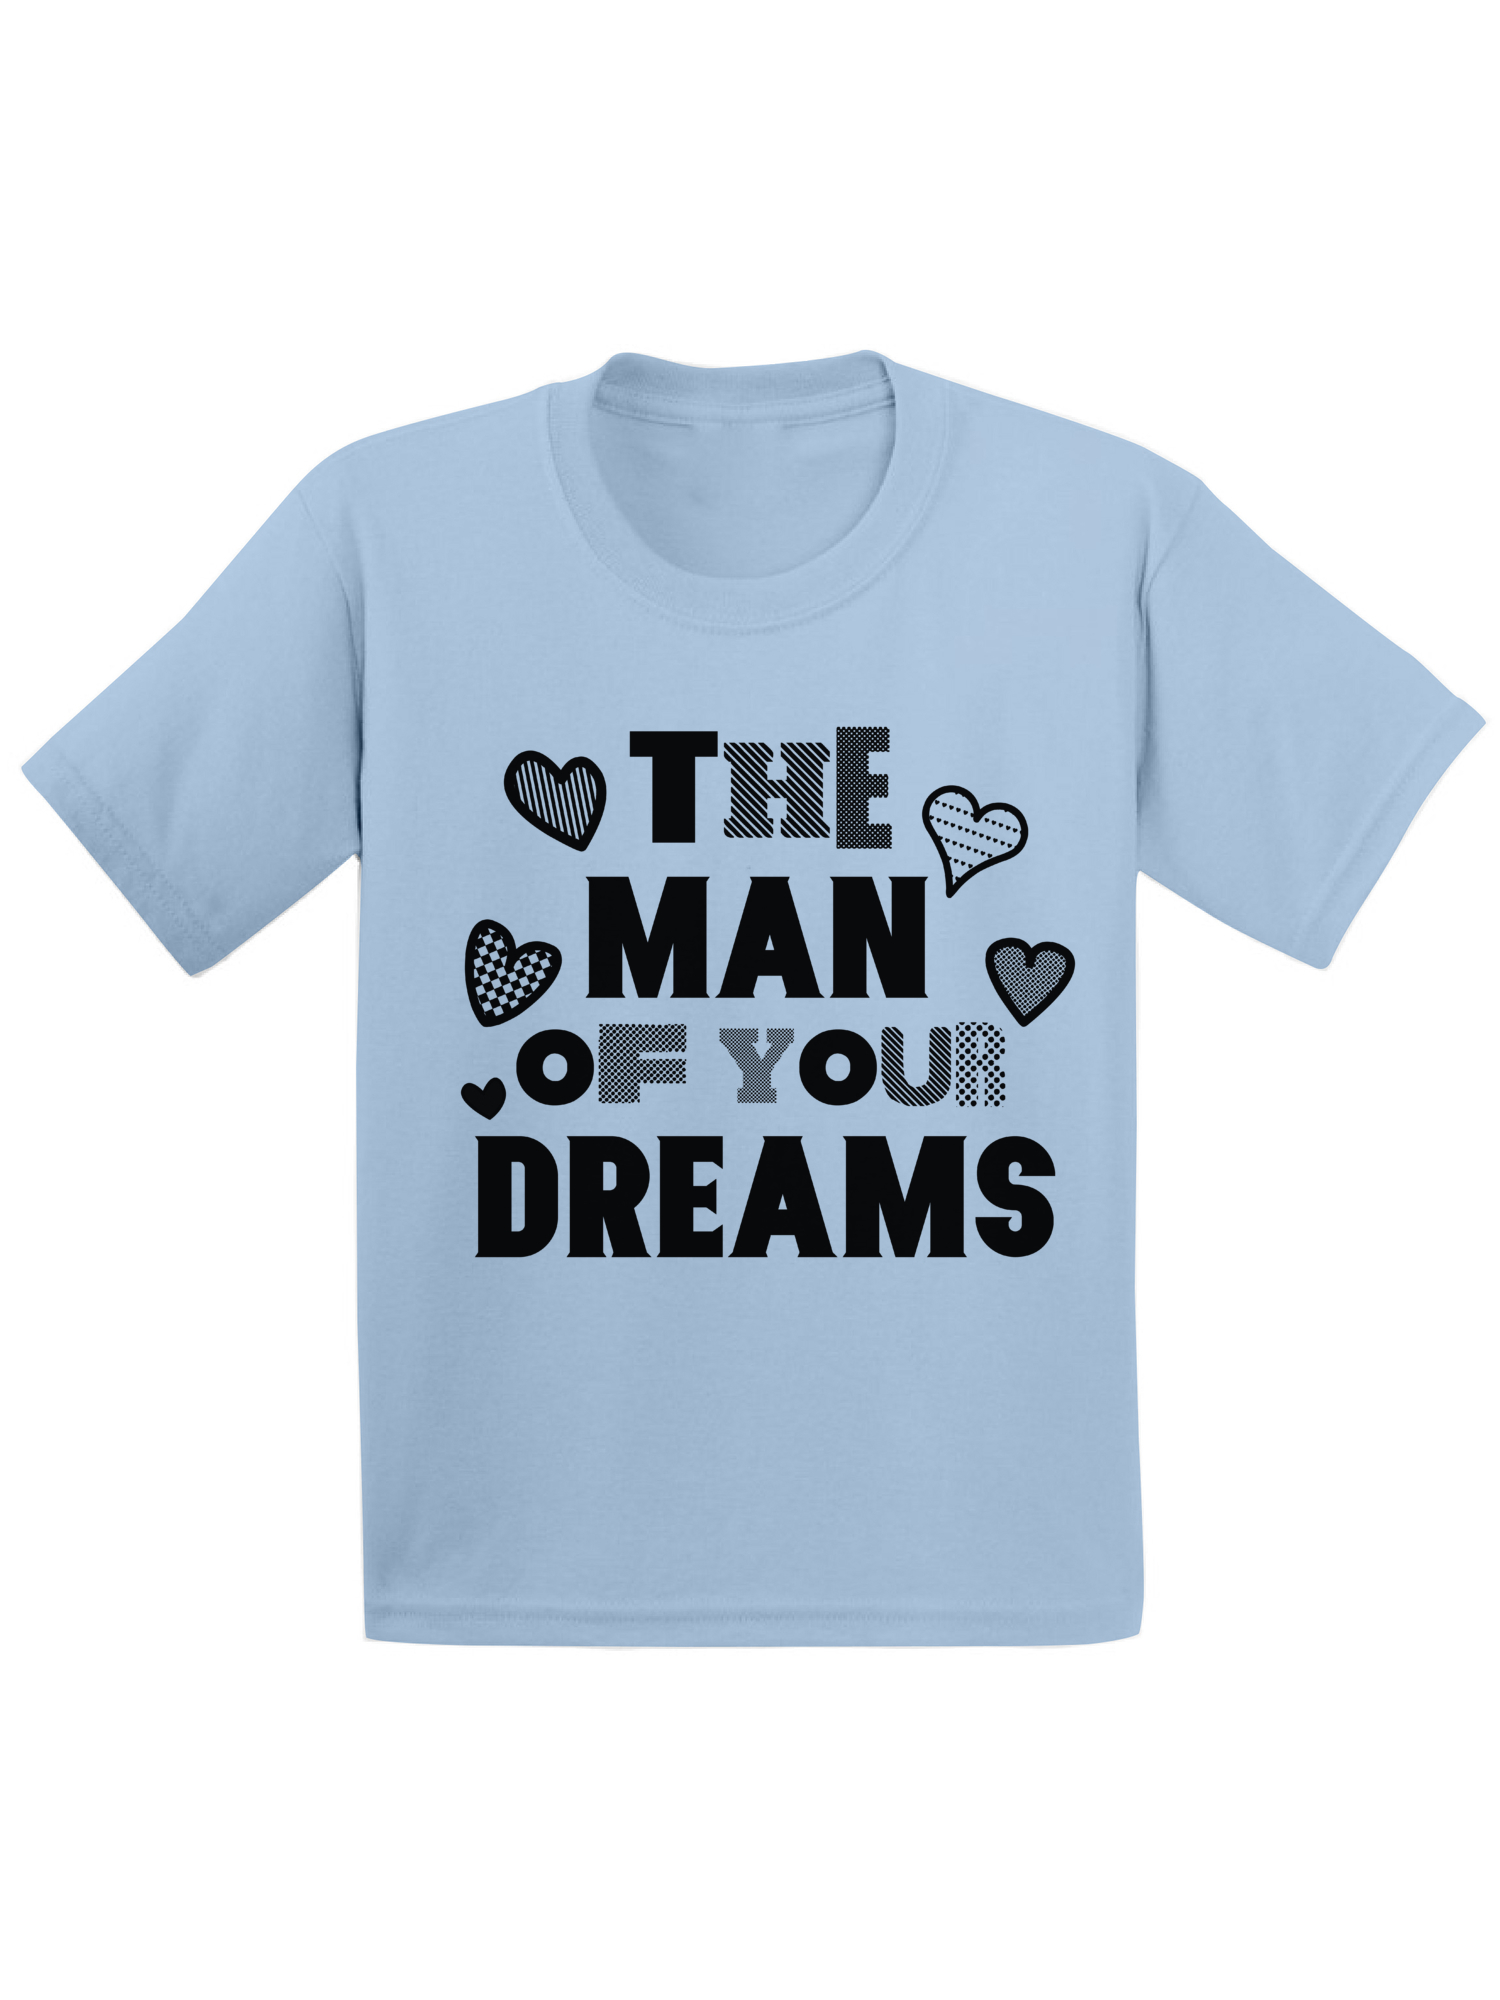 Awkward Styles The Man Of Your Dreams Tshirt for Toddler Boys Cute Gifts for Boys Mom Boys Valentine Shirt Funny Valentines Tshirt for Toddler Boys Valentine Gifts for Kids Cute Ladies Men Shirt - image 1 of 4